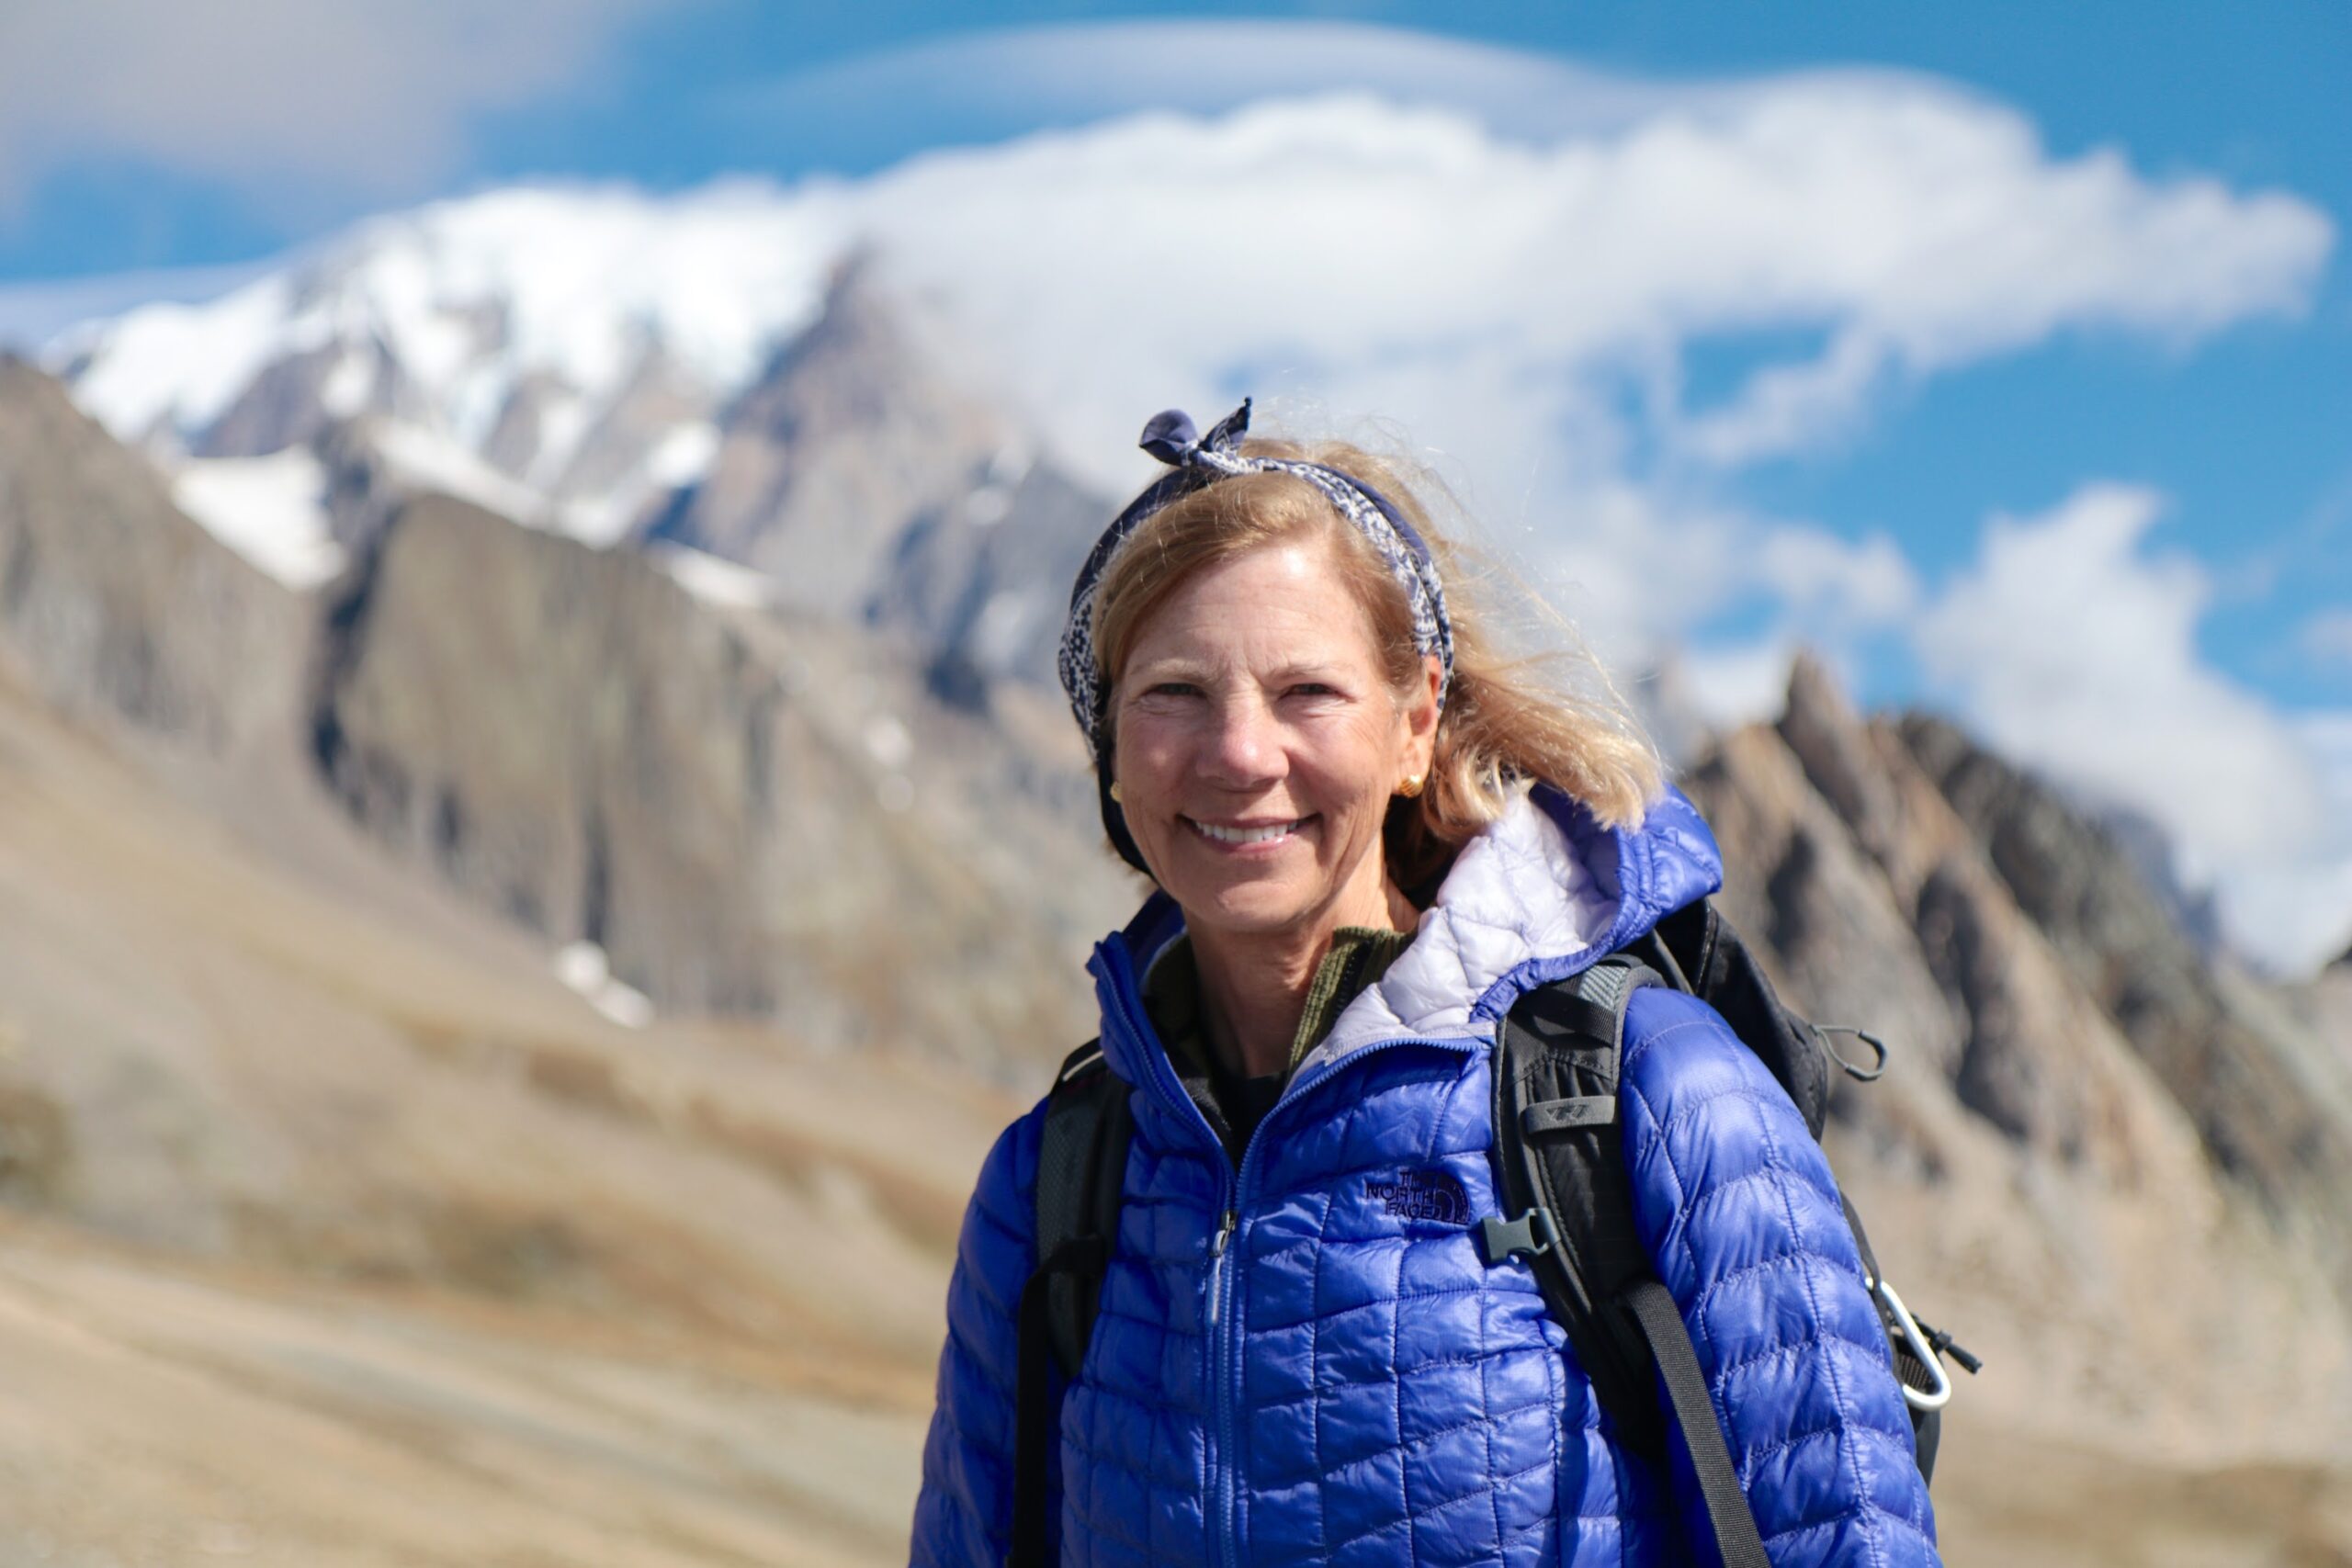 A woman in a blue jacket standing in front of mountains on an adventure travel.